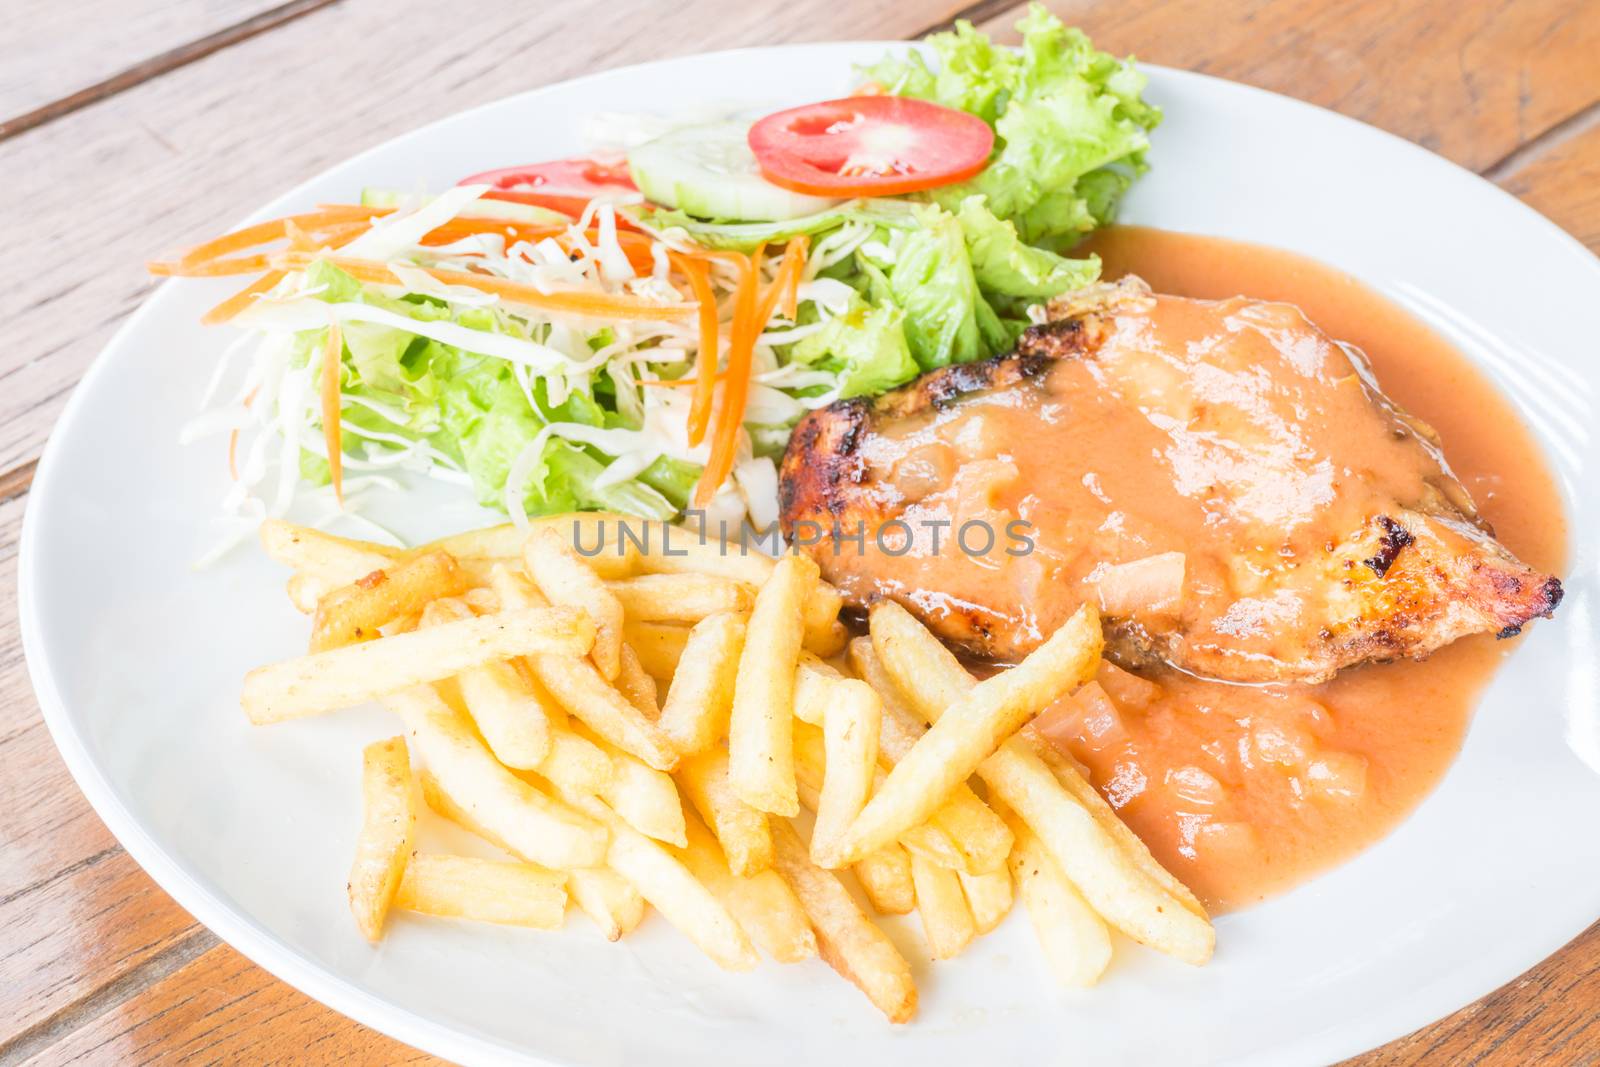 Grilled chicken steak with french fries and vegetables, stock photo